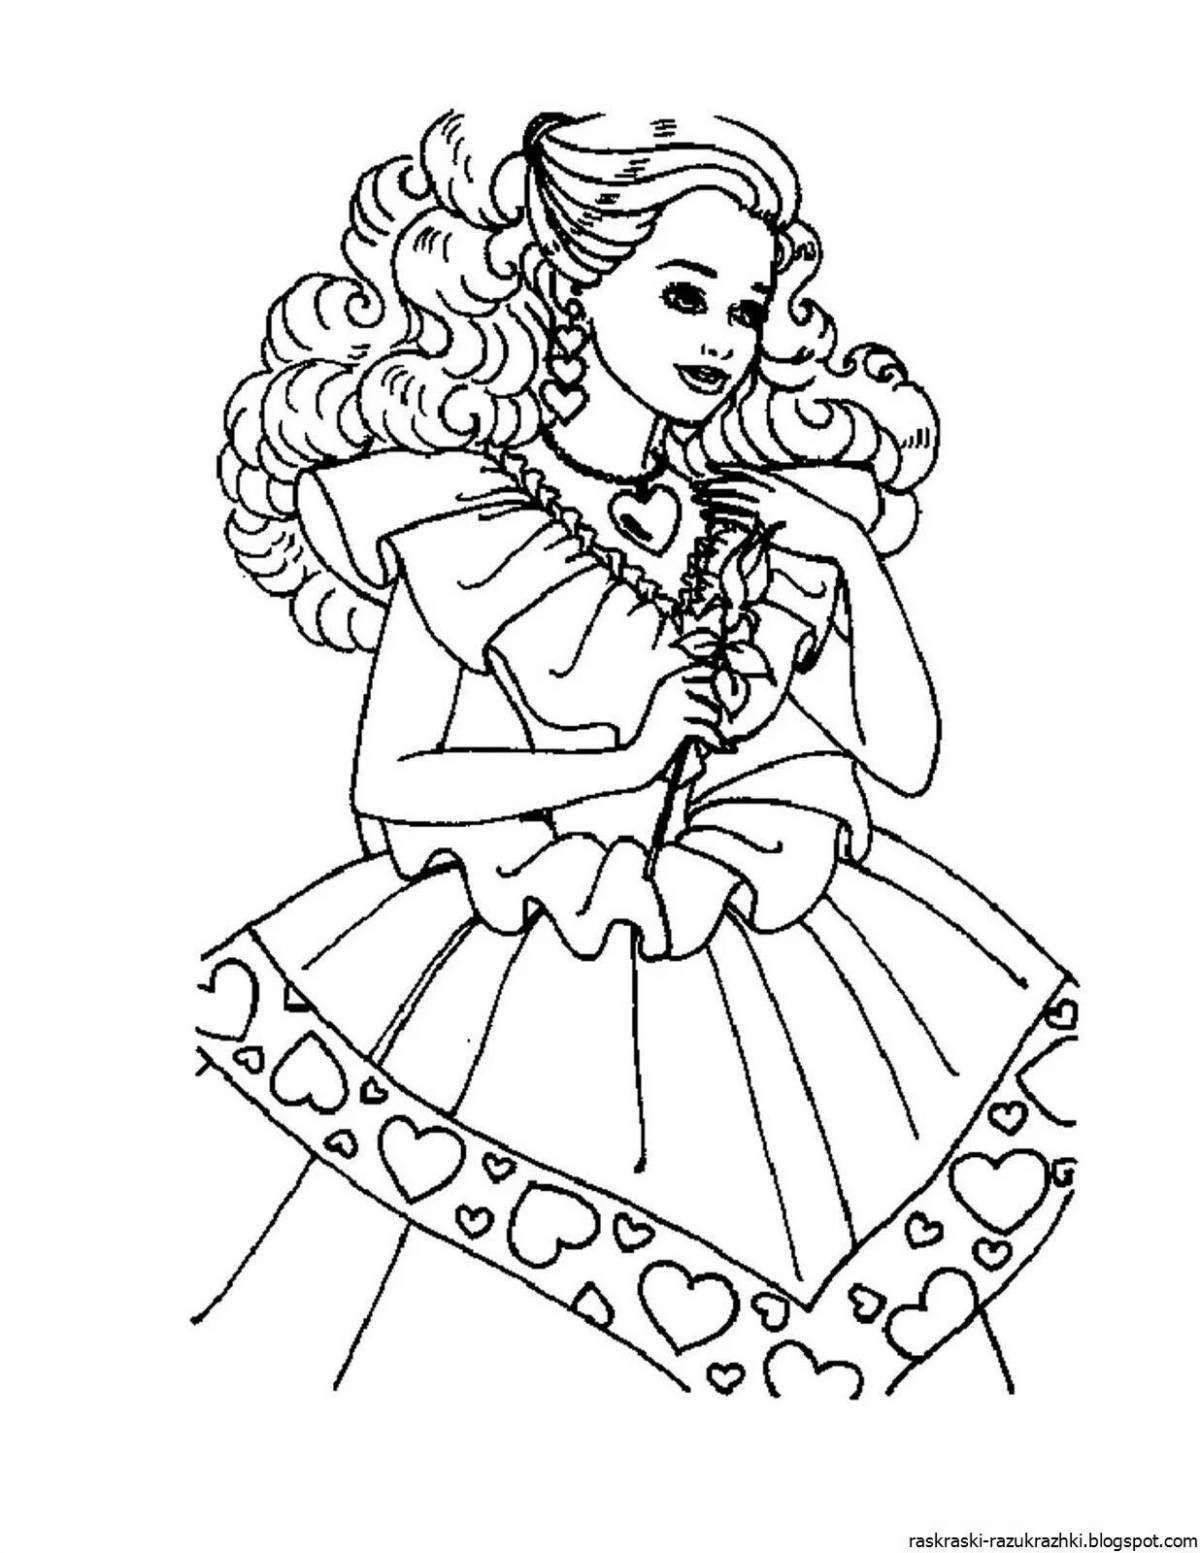 Gorgeous barbie princess coloring book for girls